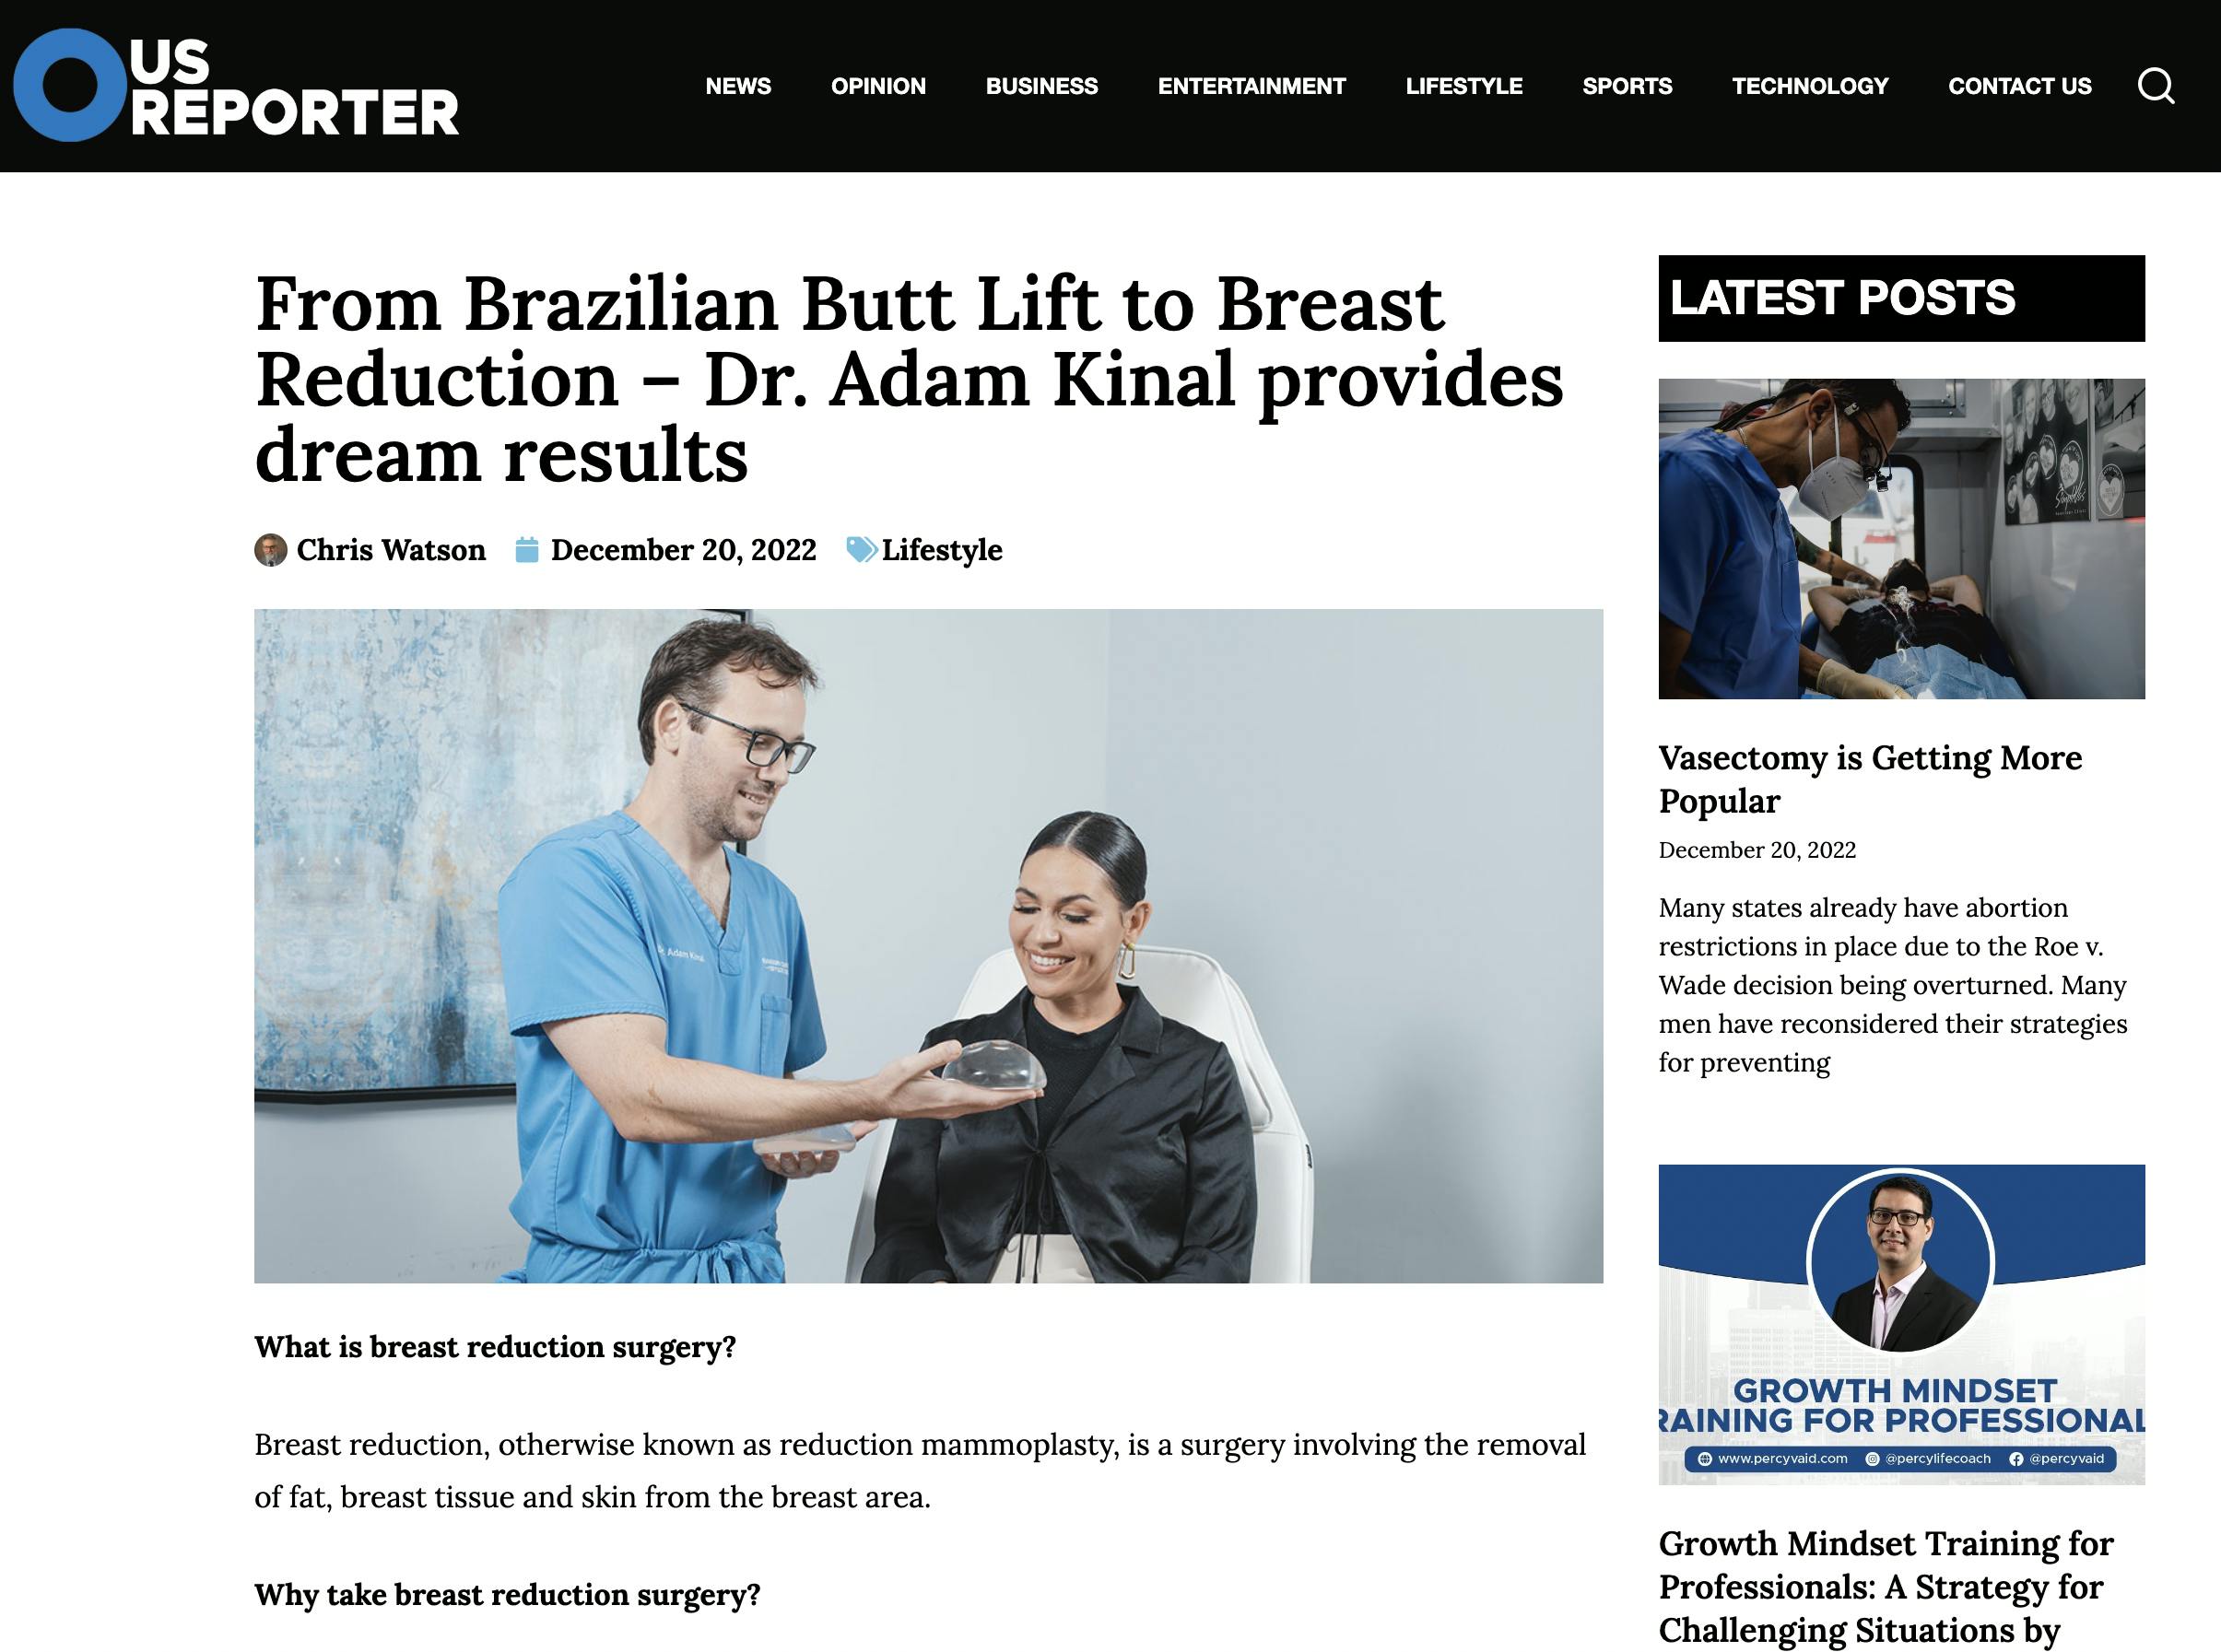 From Brazilian Butt Lift to Breast Reduction – Dr. Adam Kinal provides dream results